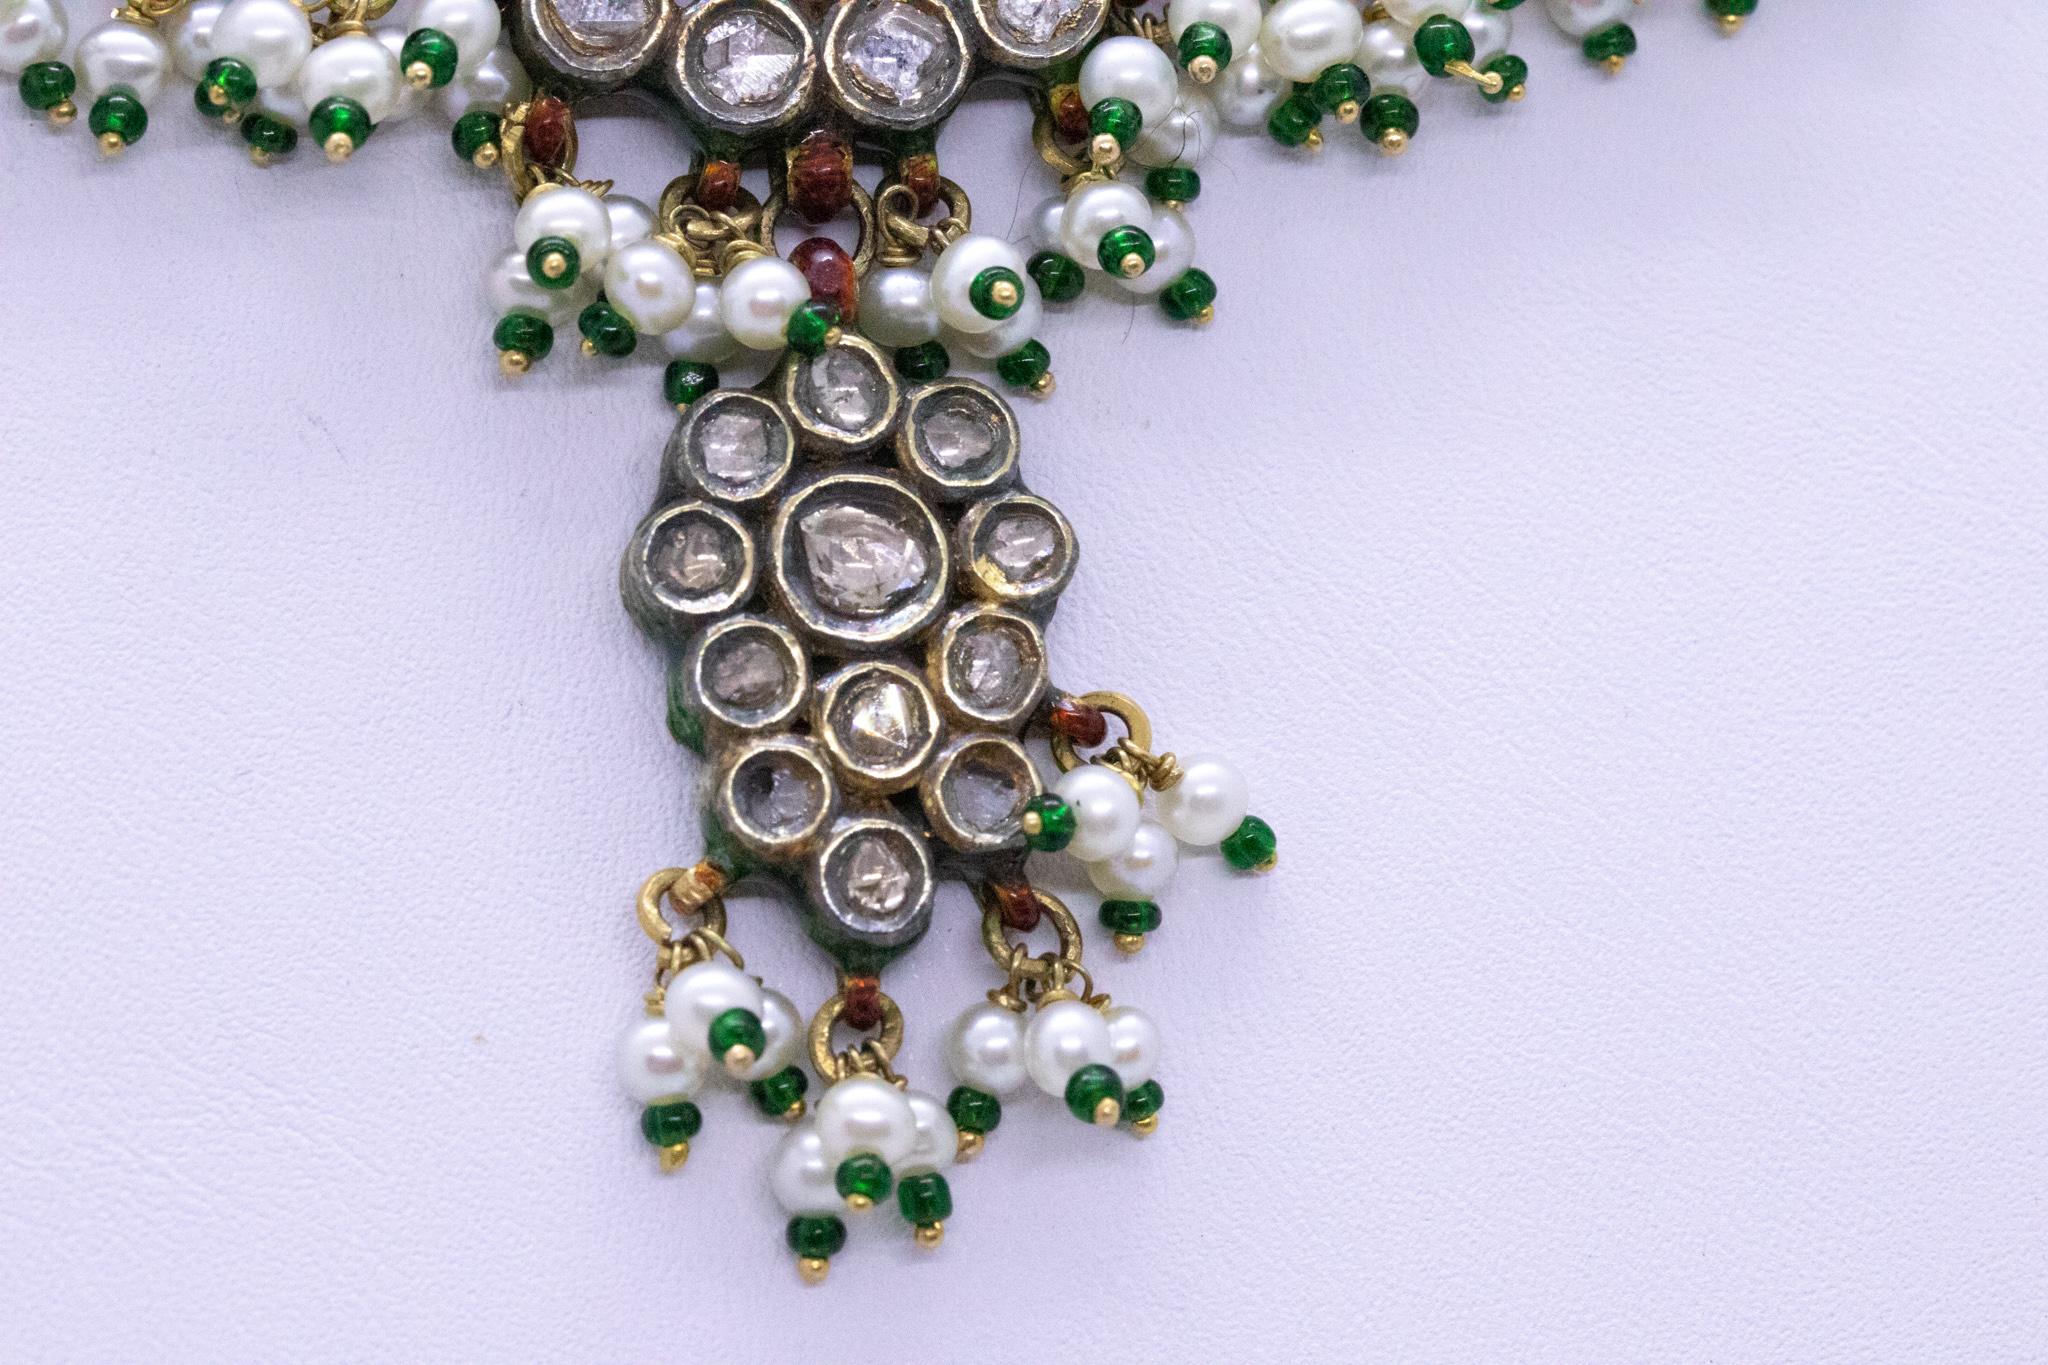 Anglo-Indian Indian Mughal Court Jeweled Necklace 21Kt Gold 32.55 Cts Diamonds Emerald Pearls